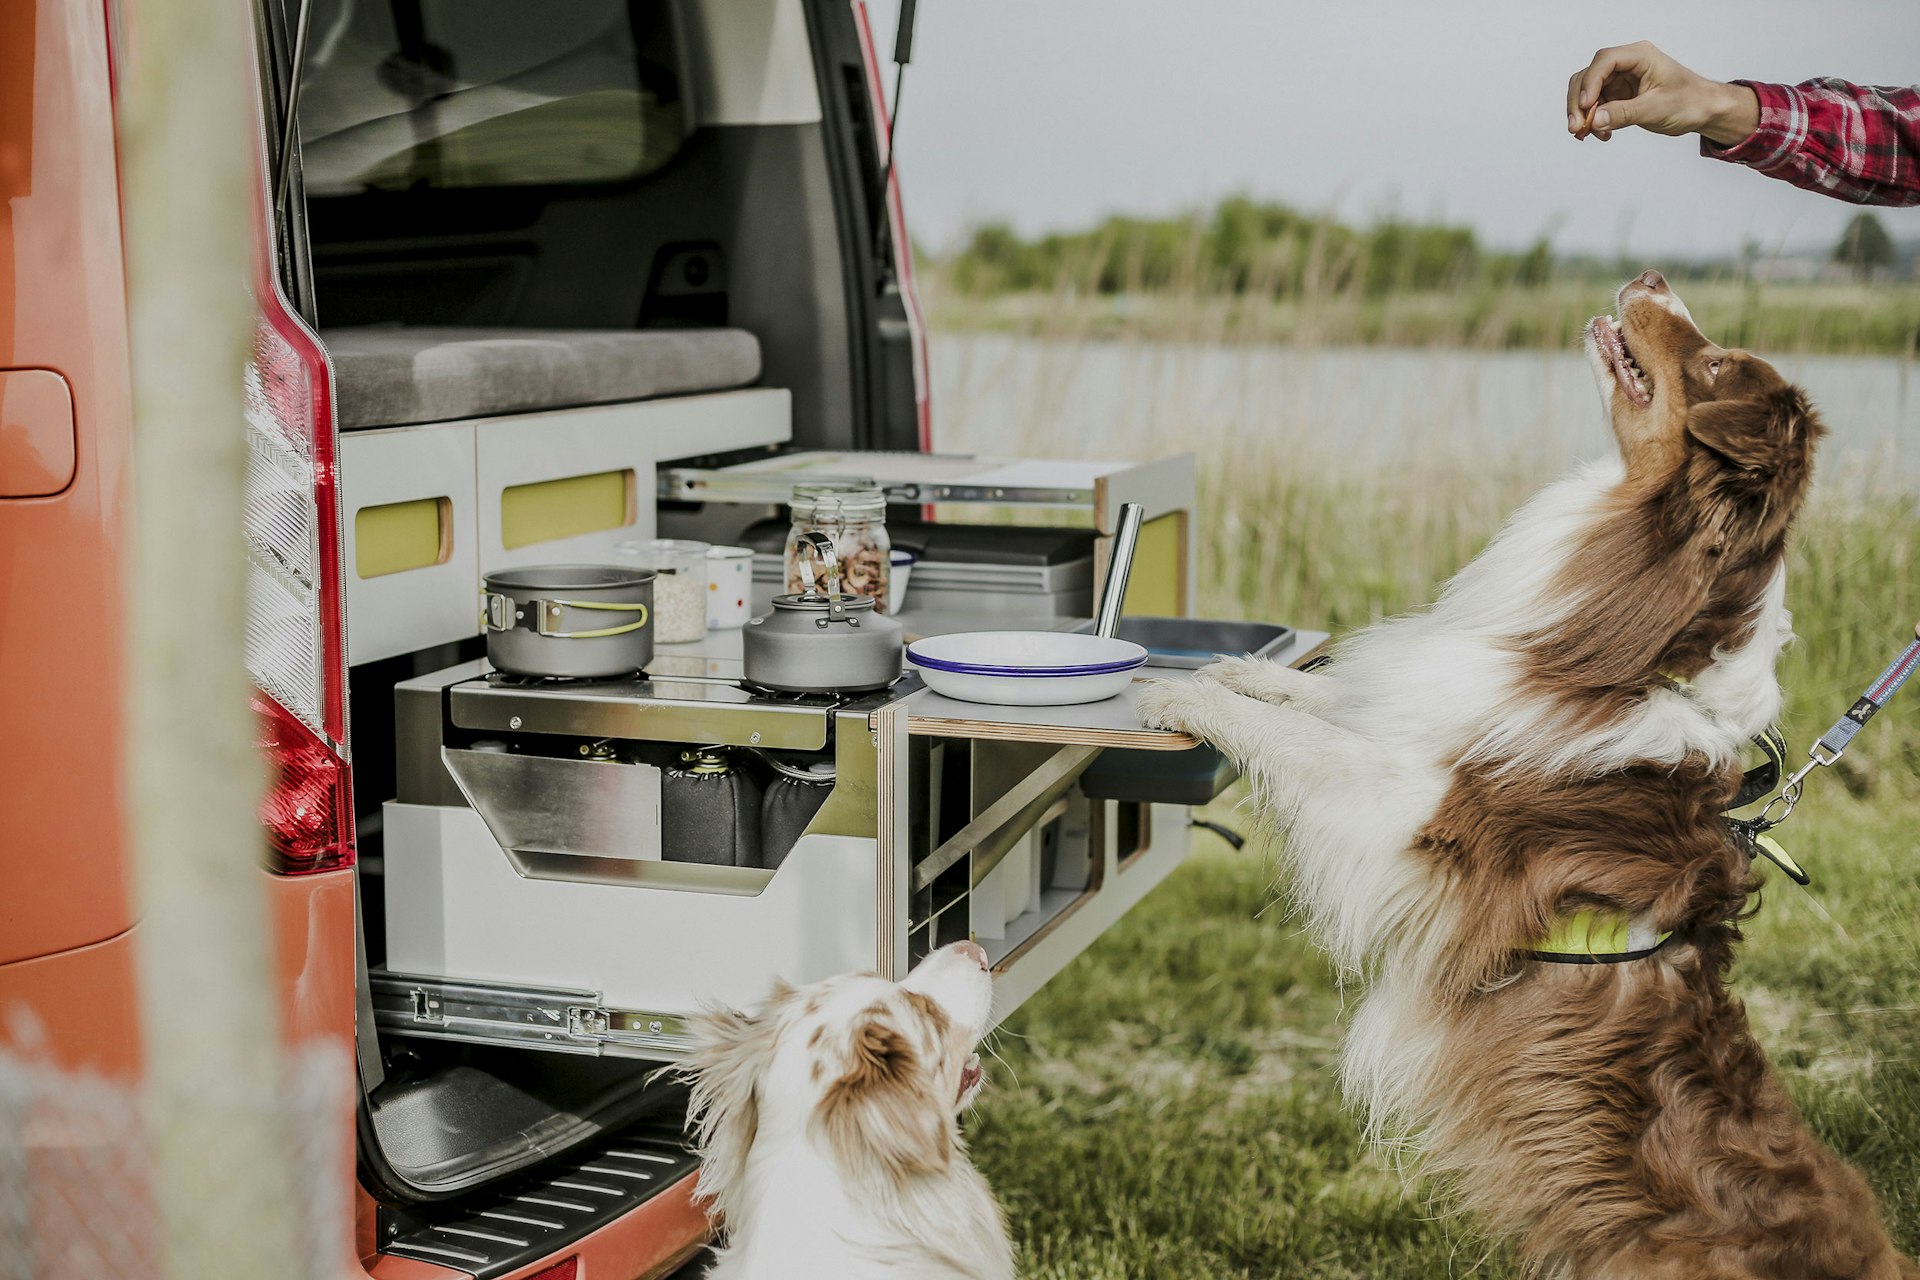 A collie dog jumps to get food from a camper